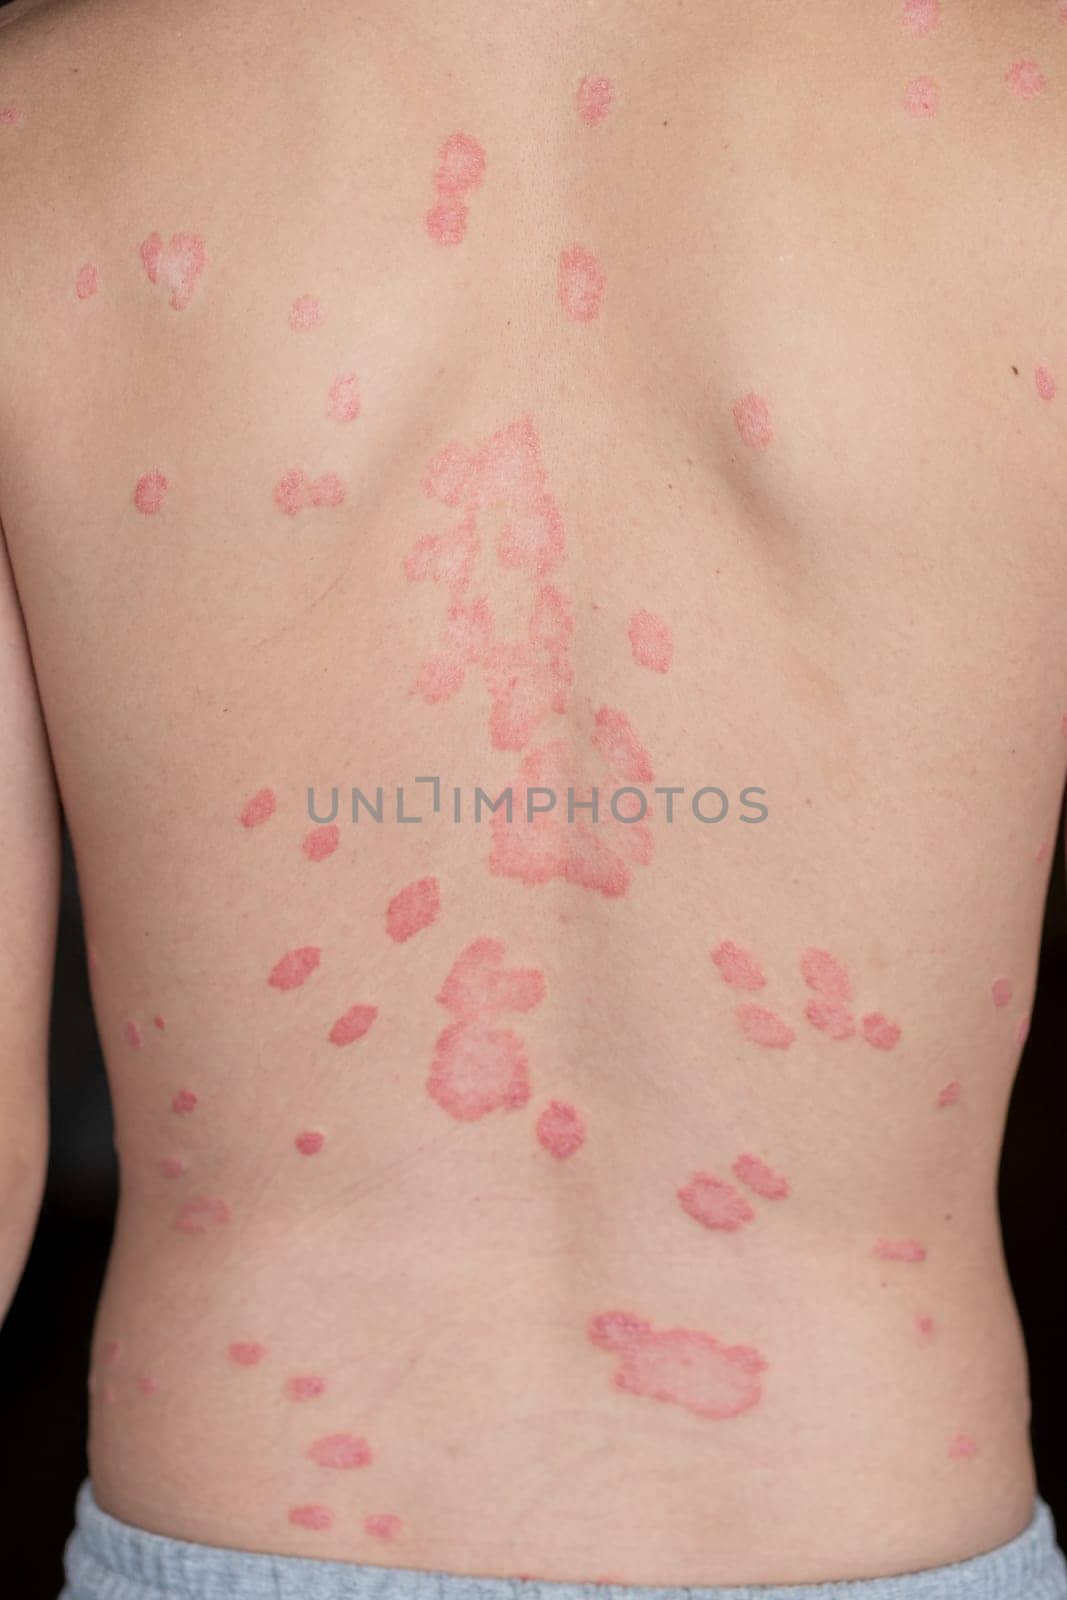 Psoriasis Vulgaris, skin patches are typically red, itchy, and scaly. by AnatoliiFoto